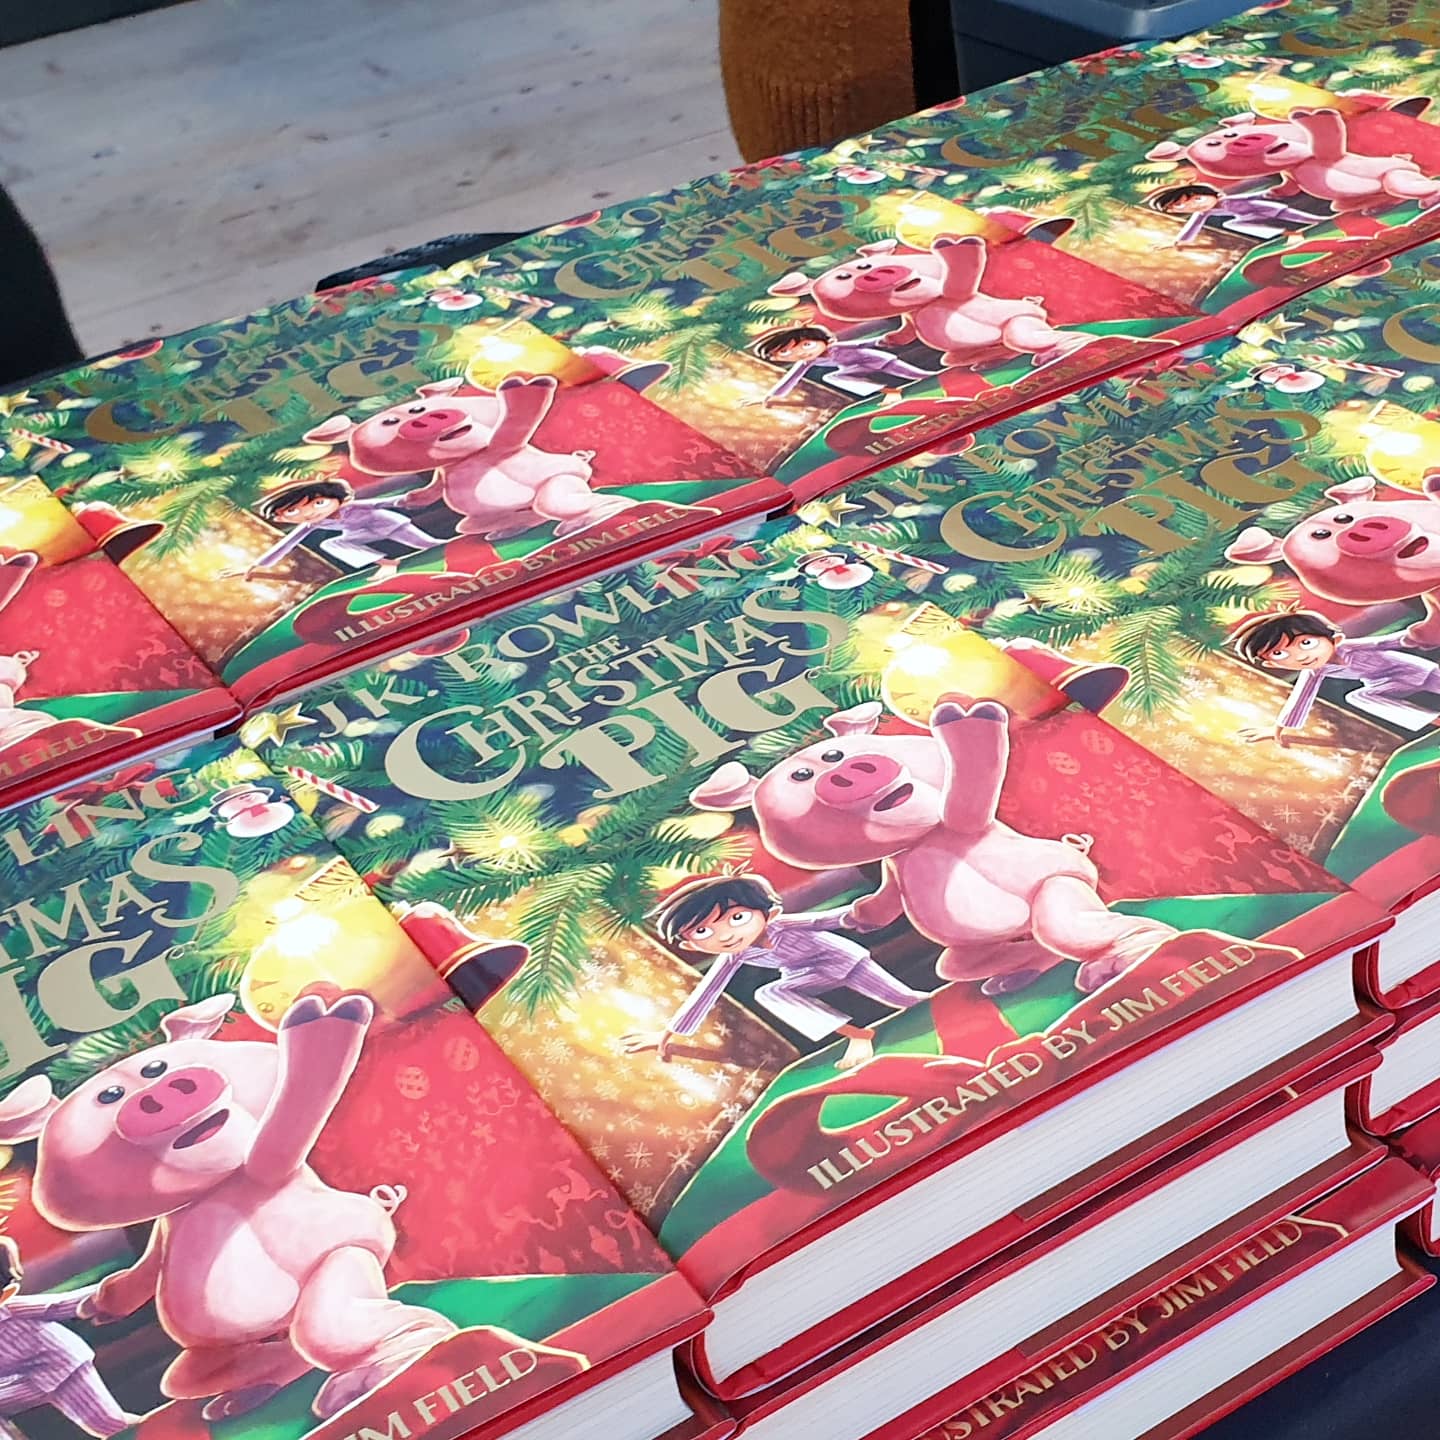 table full of the christmas pig books